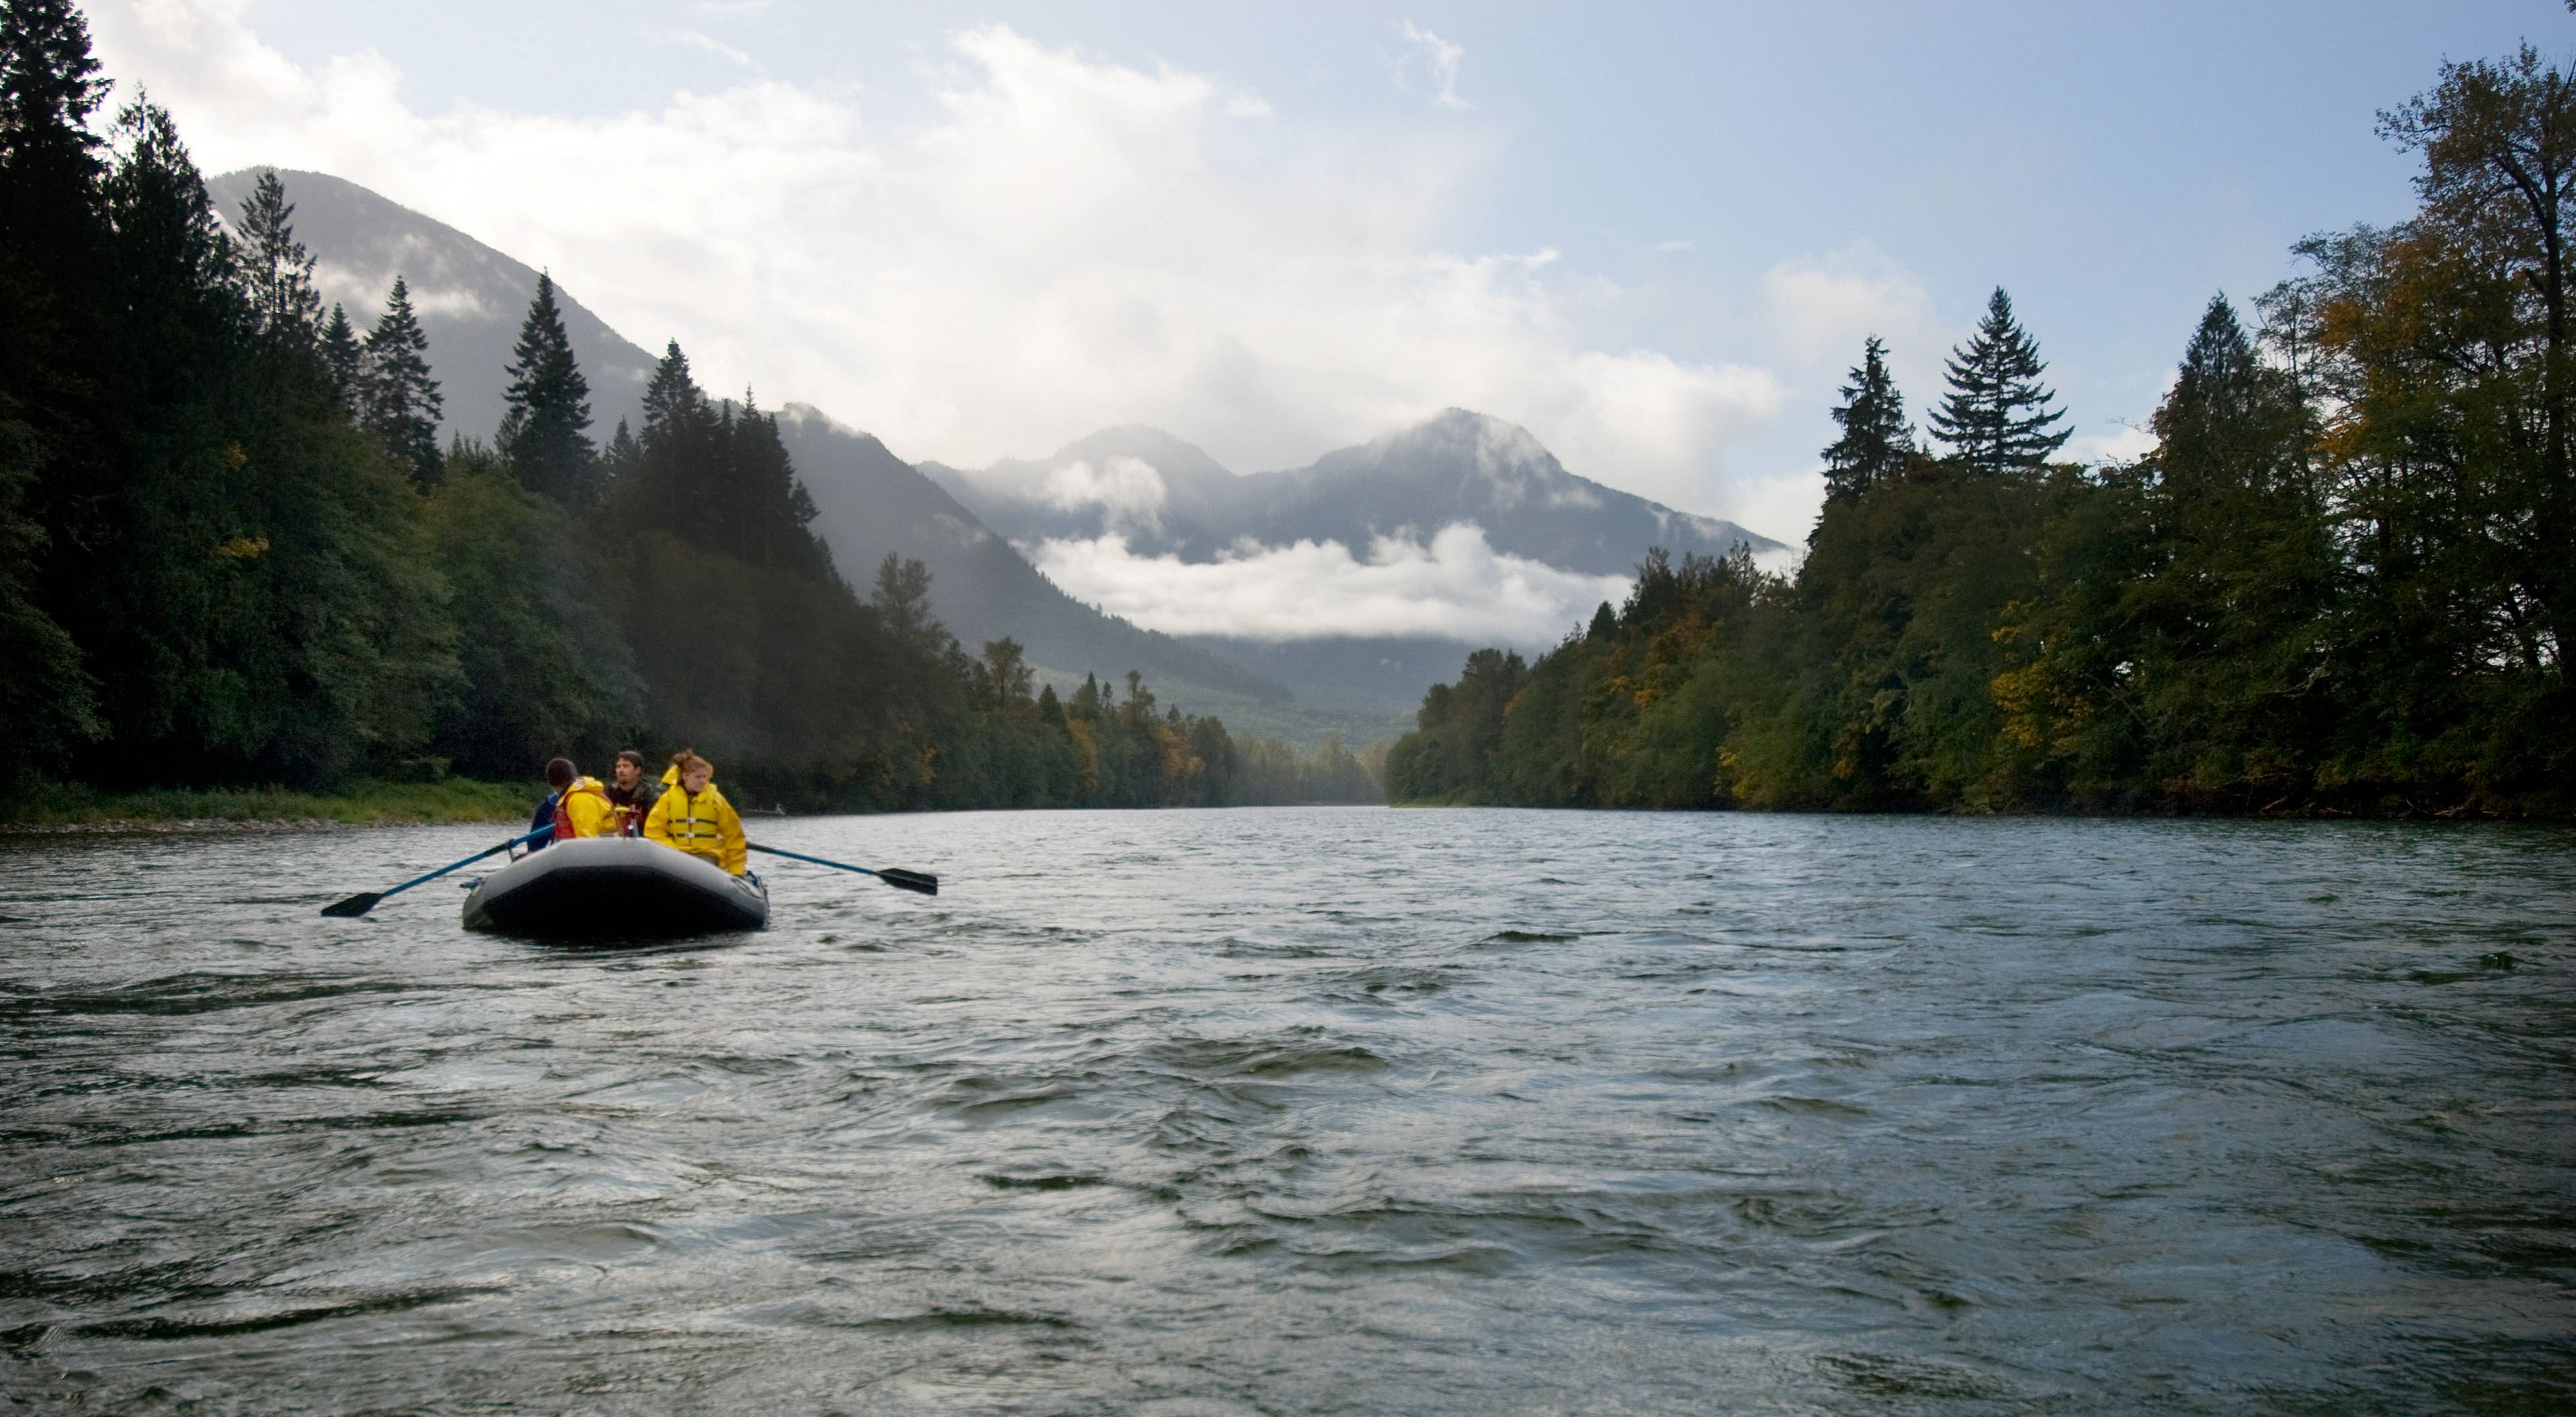 In the Skagit River in search of invasive plant locations that can reduce the diversity of aquatic insects which are vital to the health of Salmon.